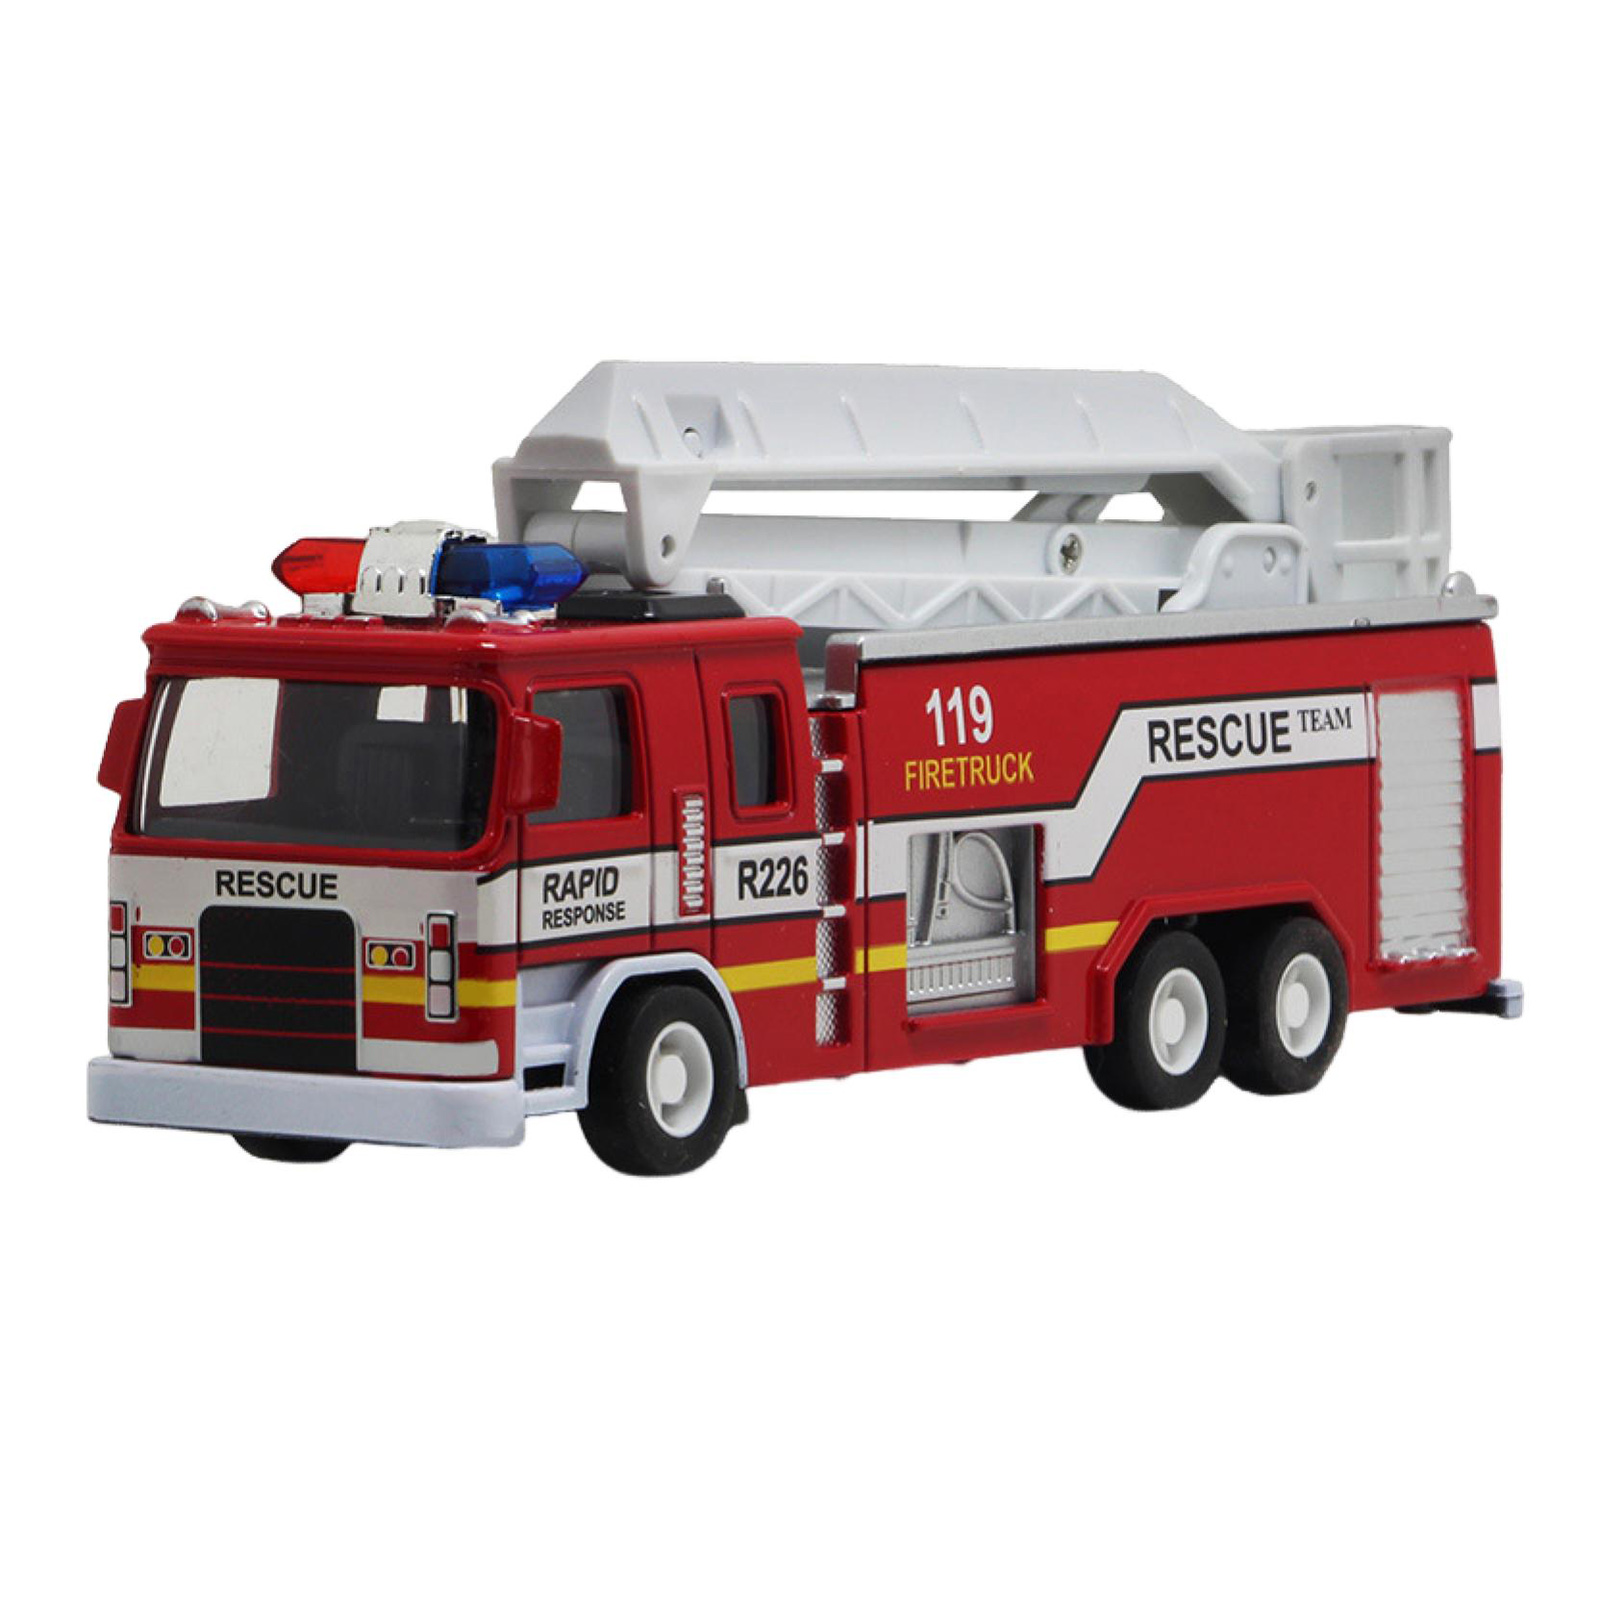 Adventure Toy Ladder Truck Toy Simulation Fire-truck Realistic Fire